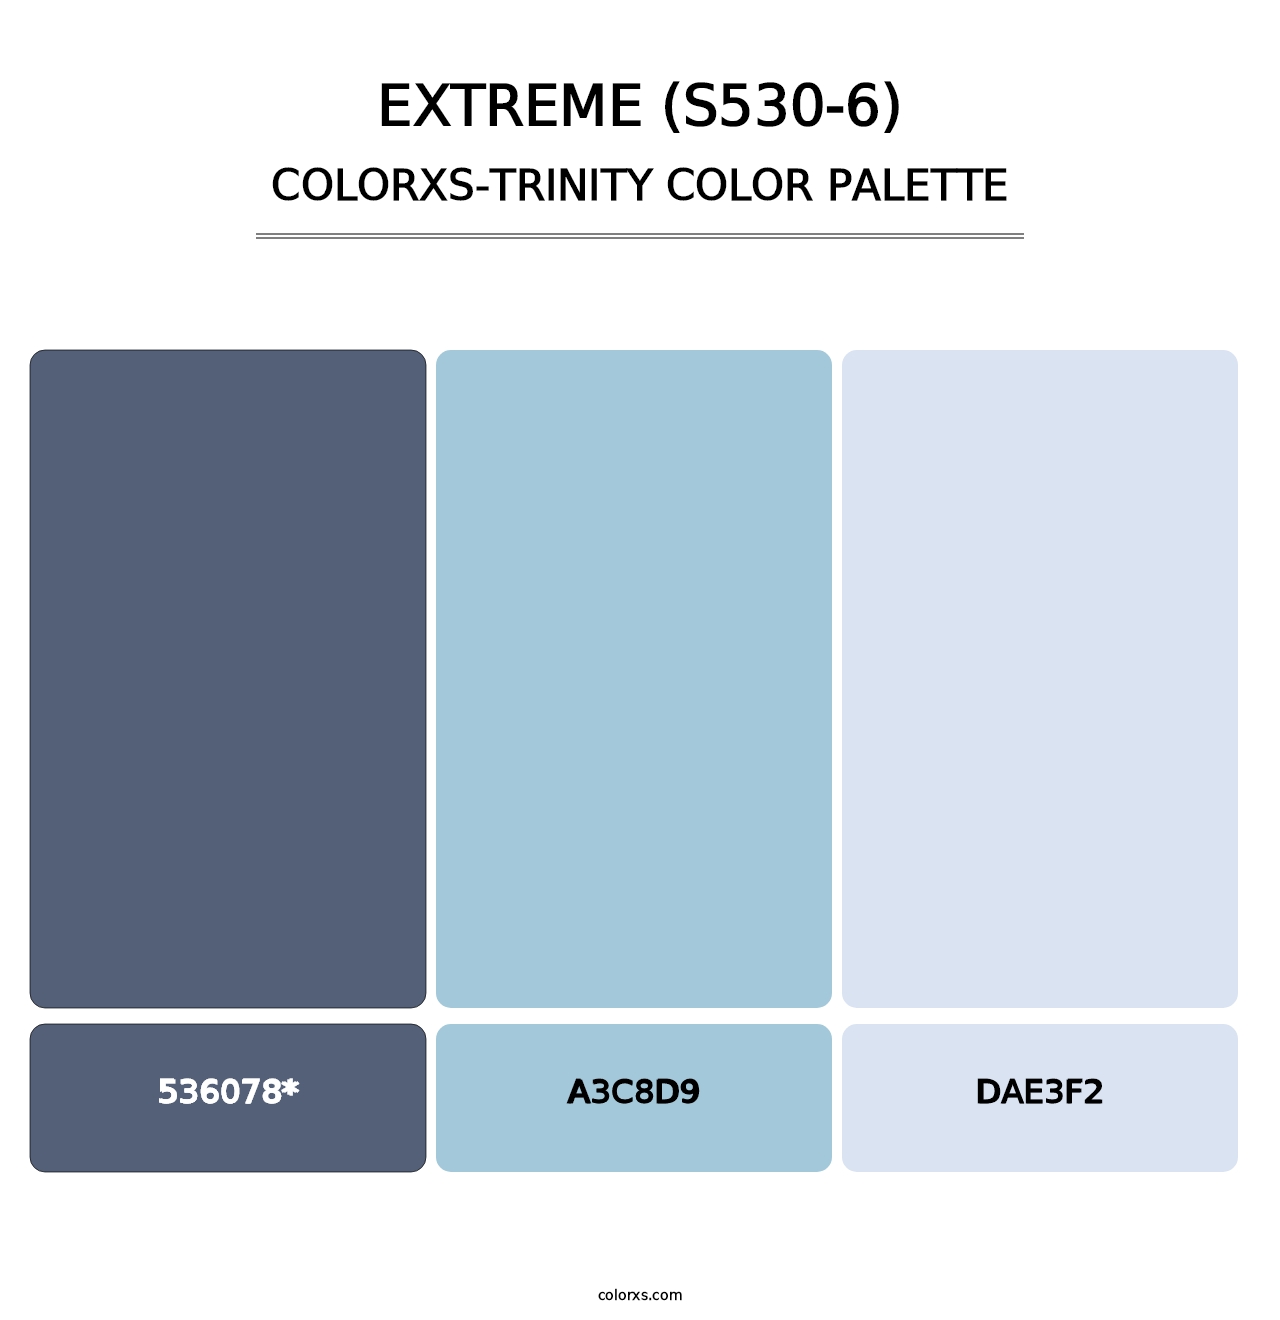 Extreme (S530-6) - Colorxs Trinity Palette